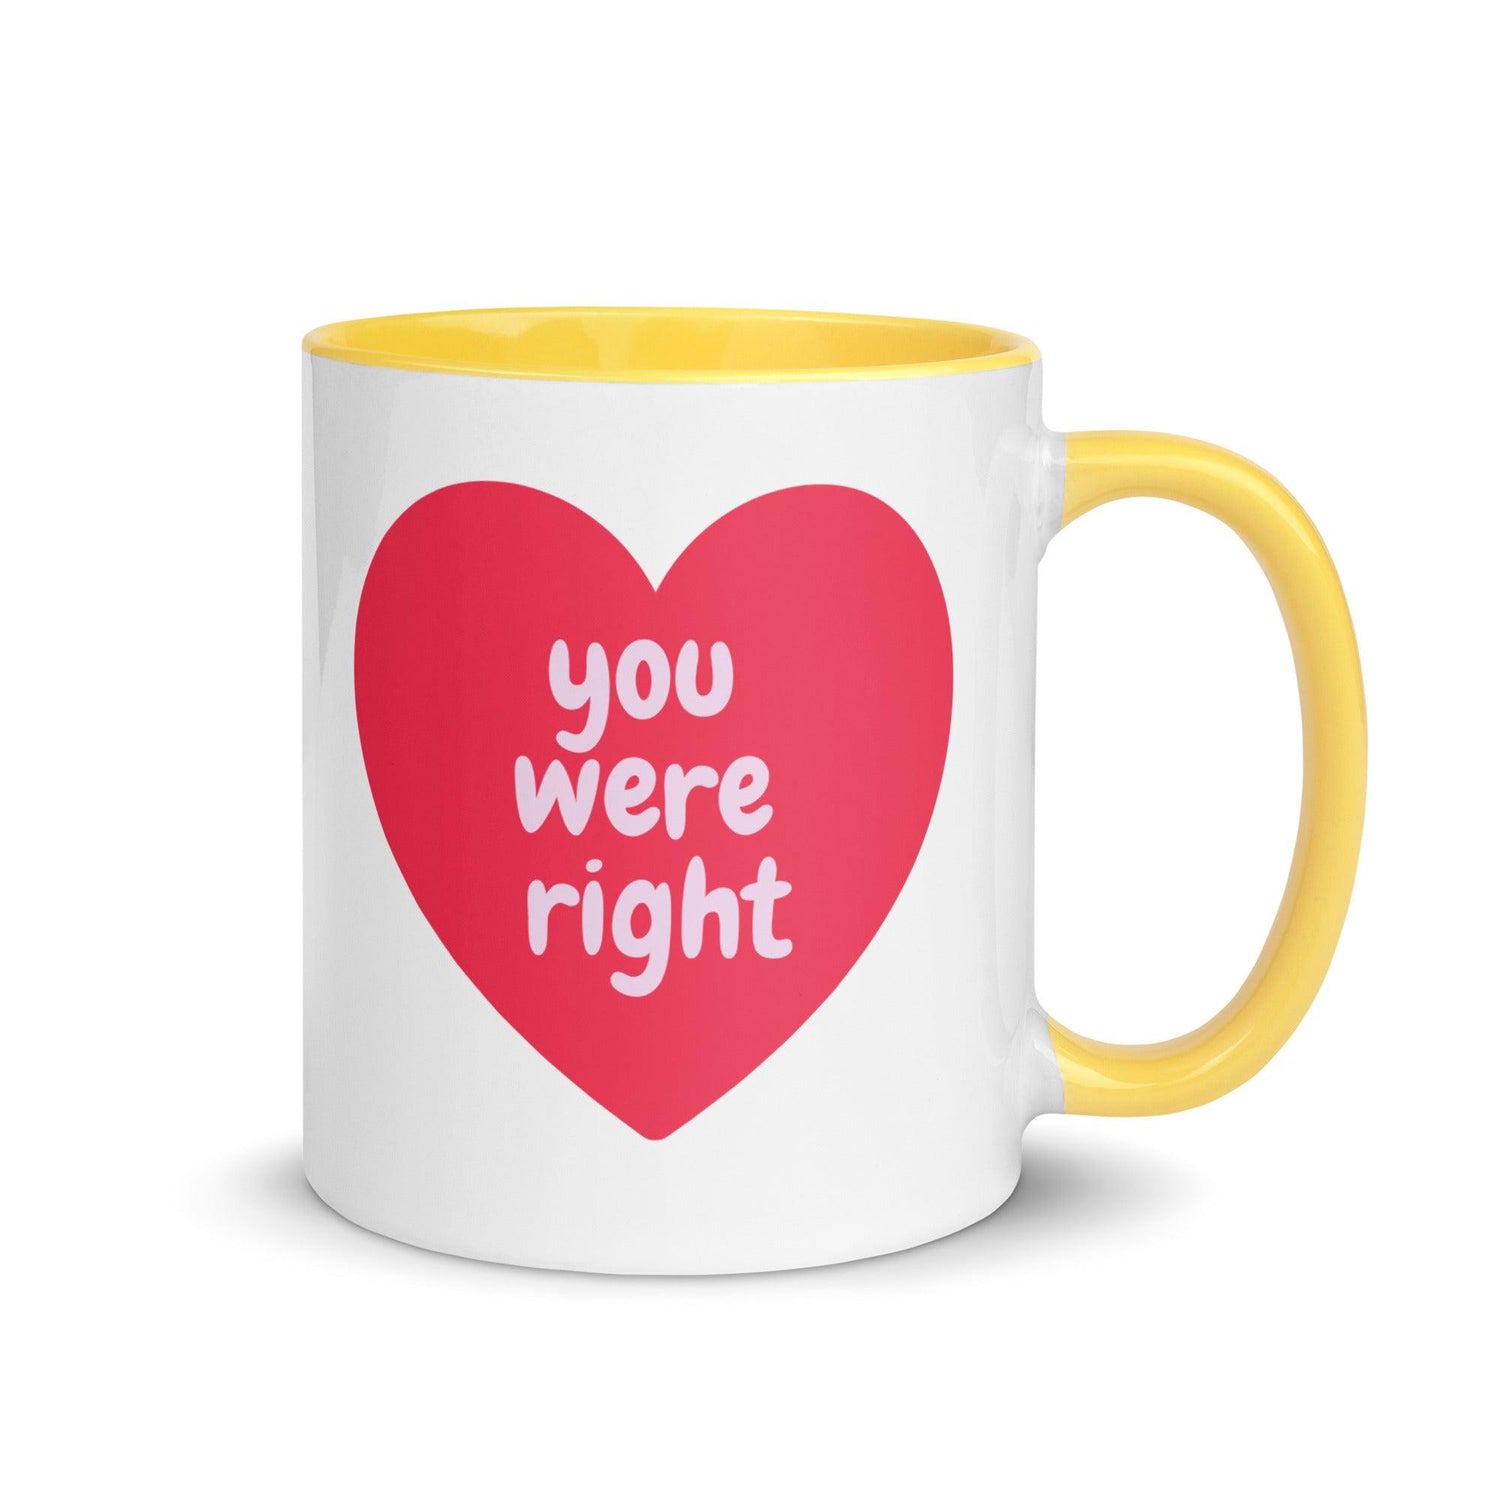 You Were Right Heart Mug with Color Inside - MessyBunFun.com